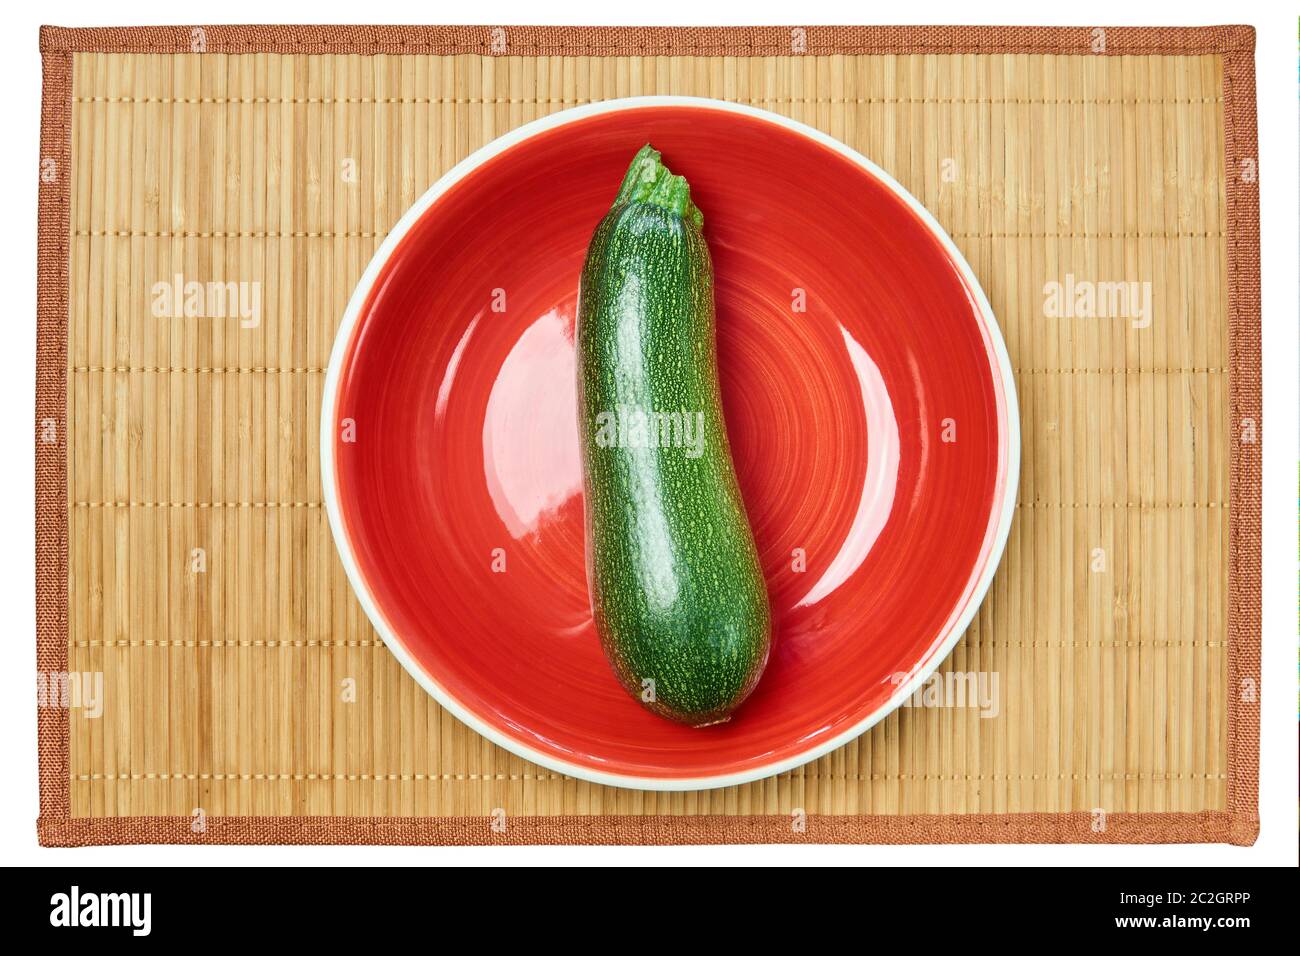 color contrasting still life - patterned green zucchini squash on a red plate on a cane serving mat Stock Photo